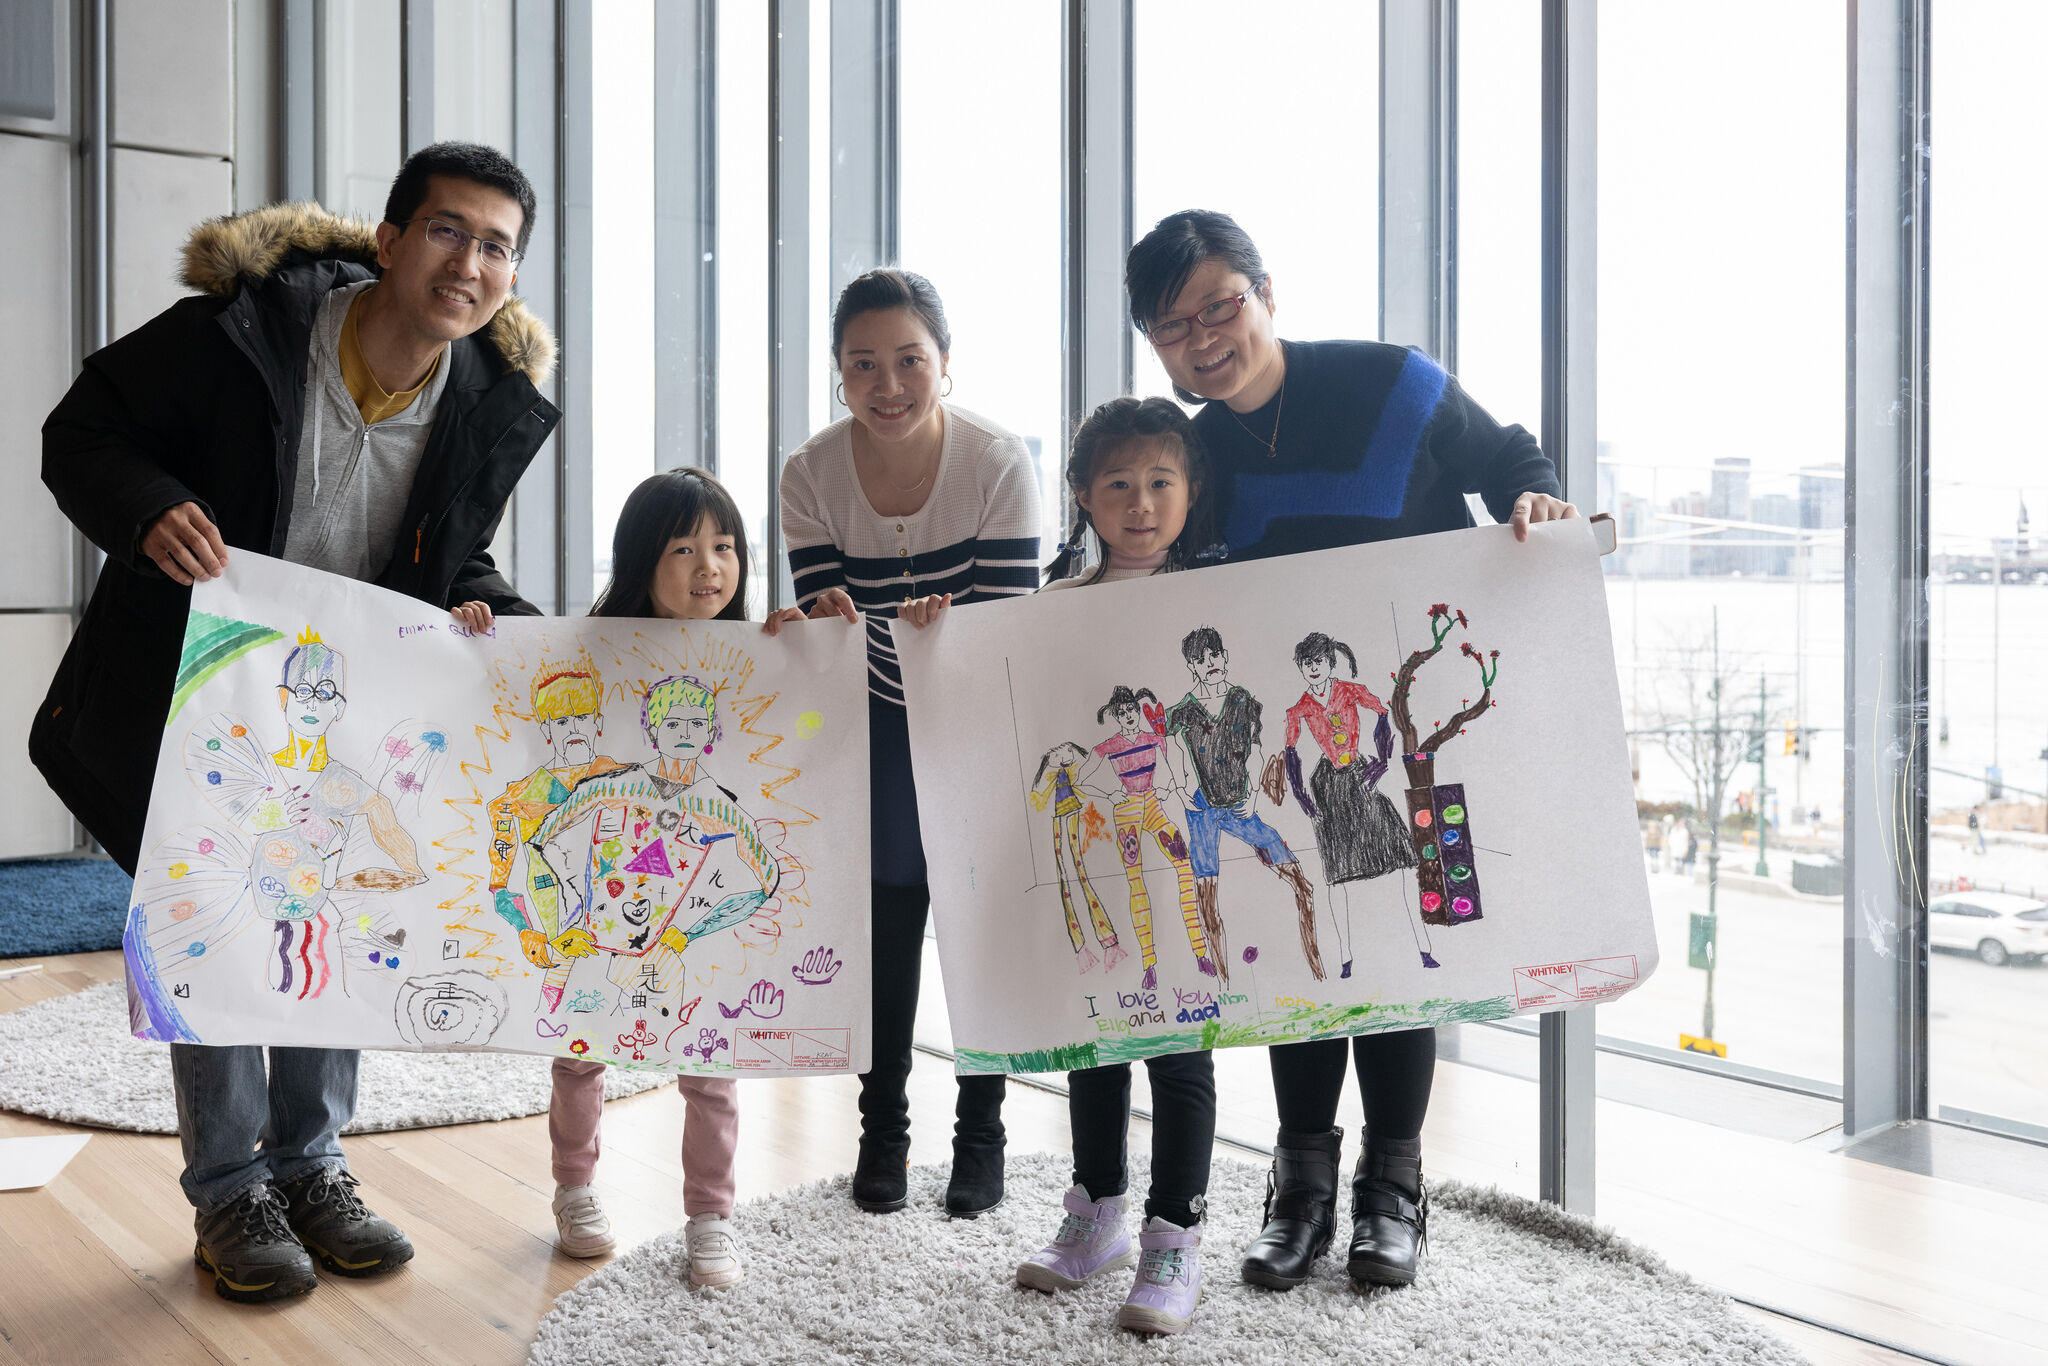 Family proudly displays children's colorful drawings in a bright room with large windows overlooking a cityscape.